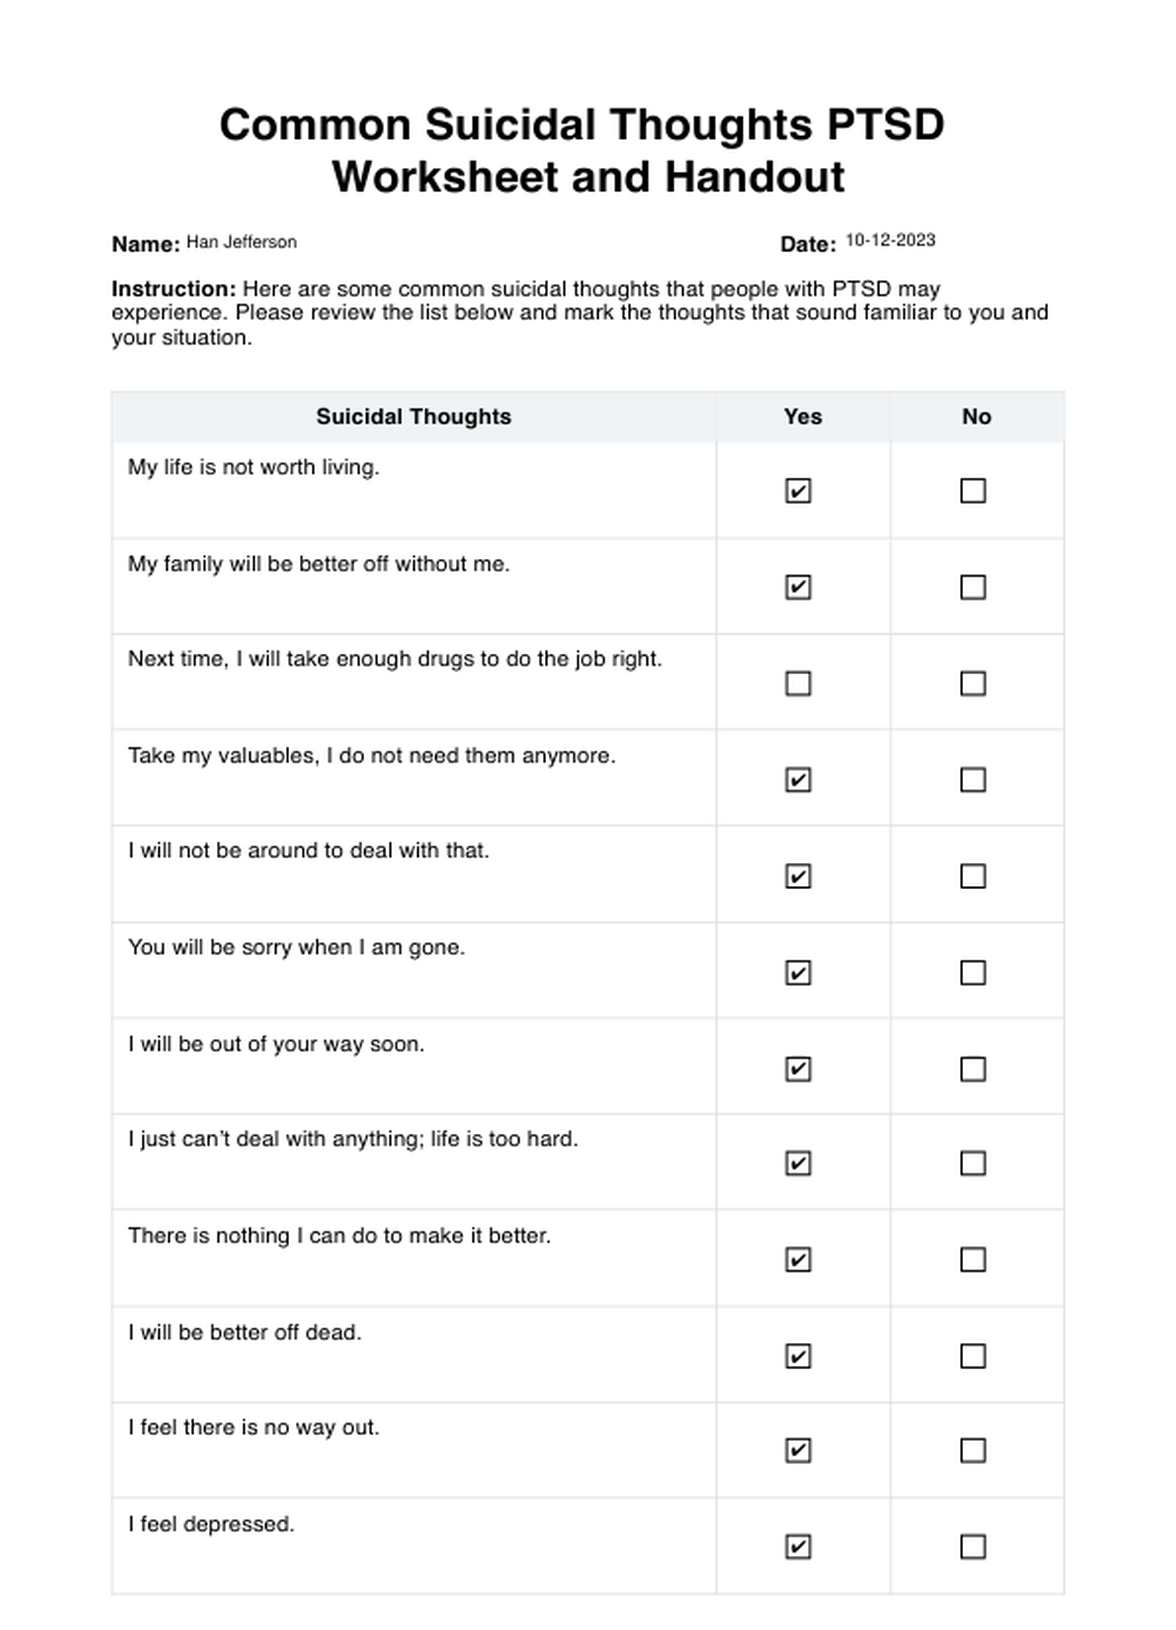 Common Suicidal Thoughts PTSD Worksheet and Handout PDF Example